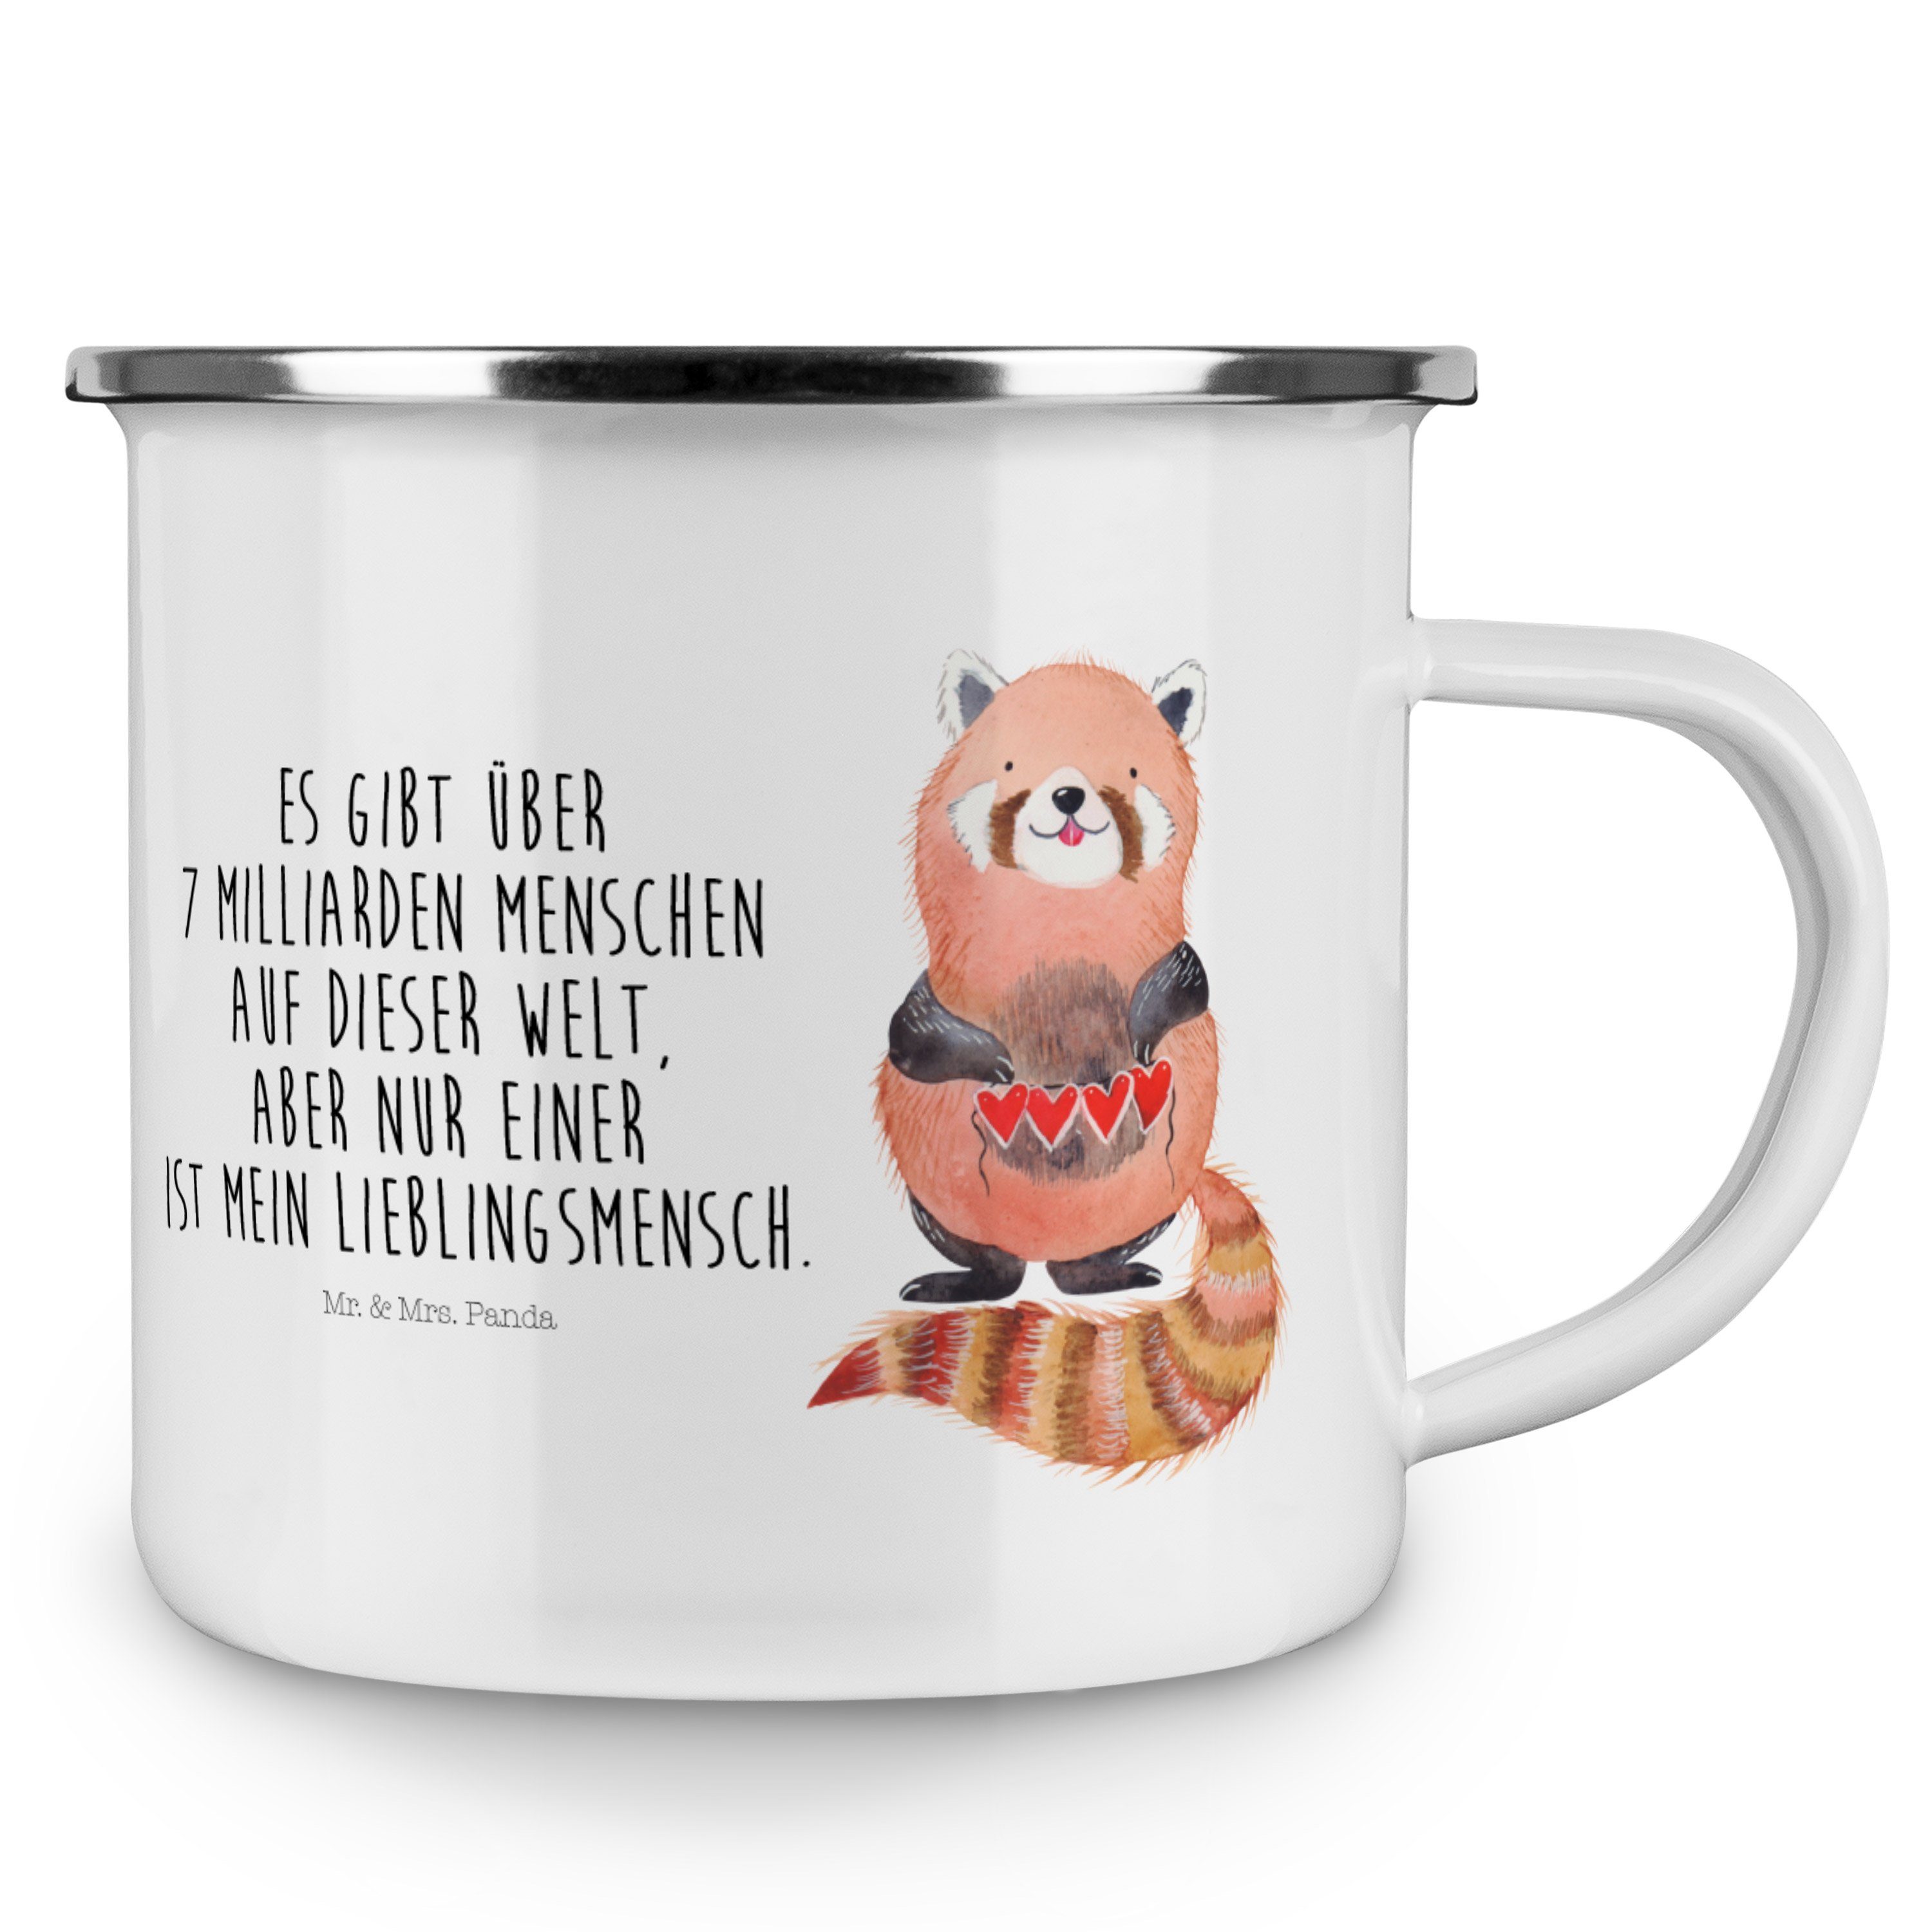 Panda Mrs. Emaille Panda Becher Geschenk, Mr. Trinkbecher, - Weiß Roter Emaille & Emaille Campingbe, -